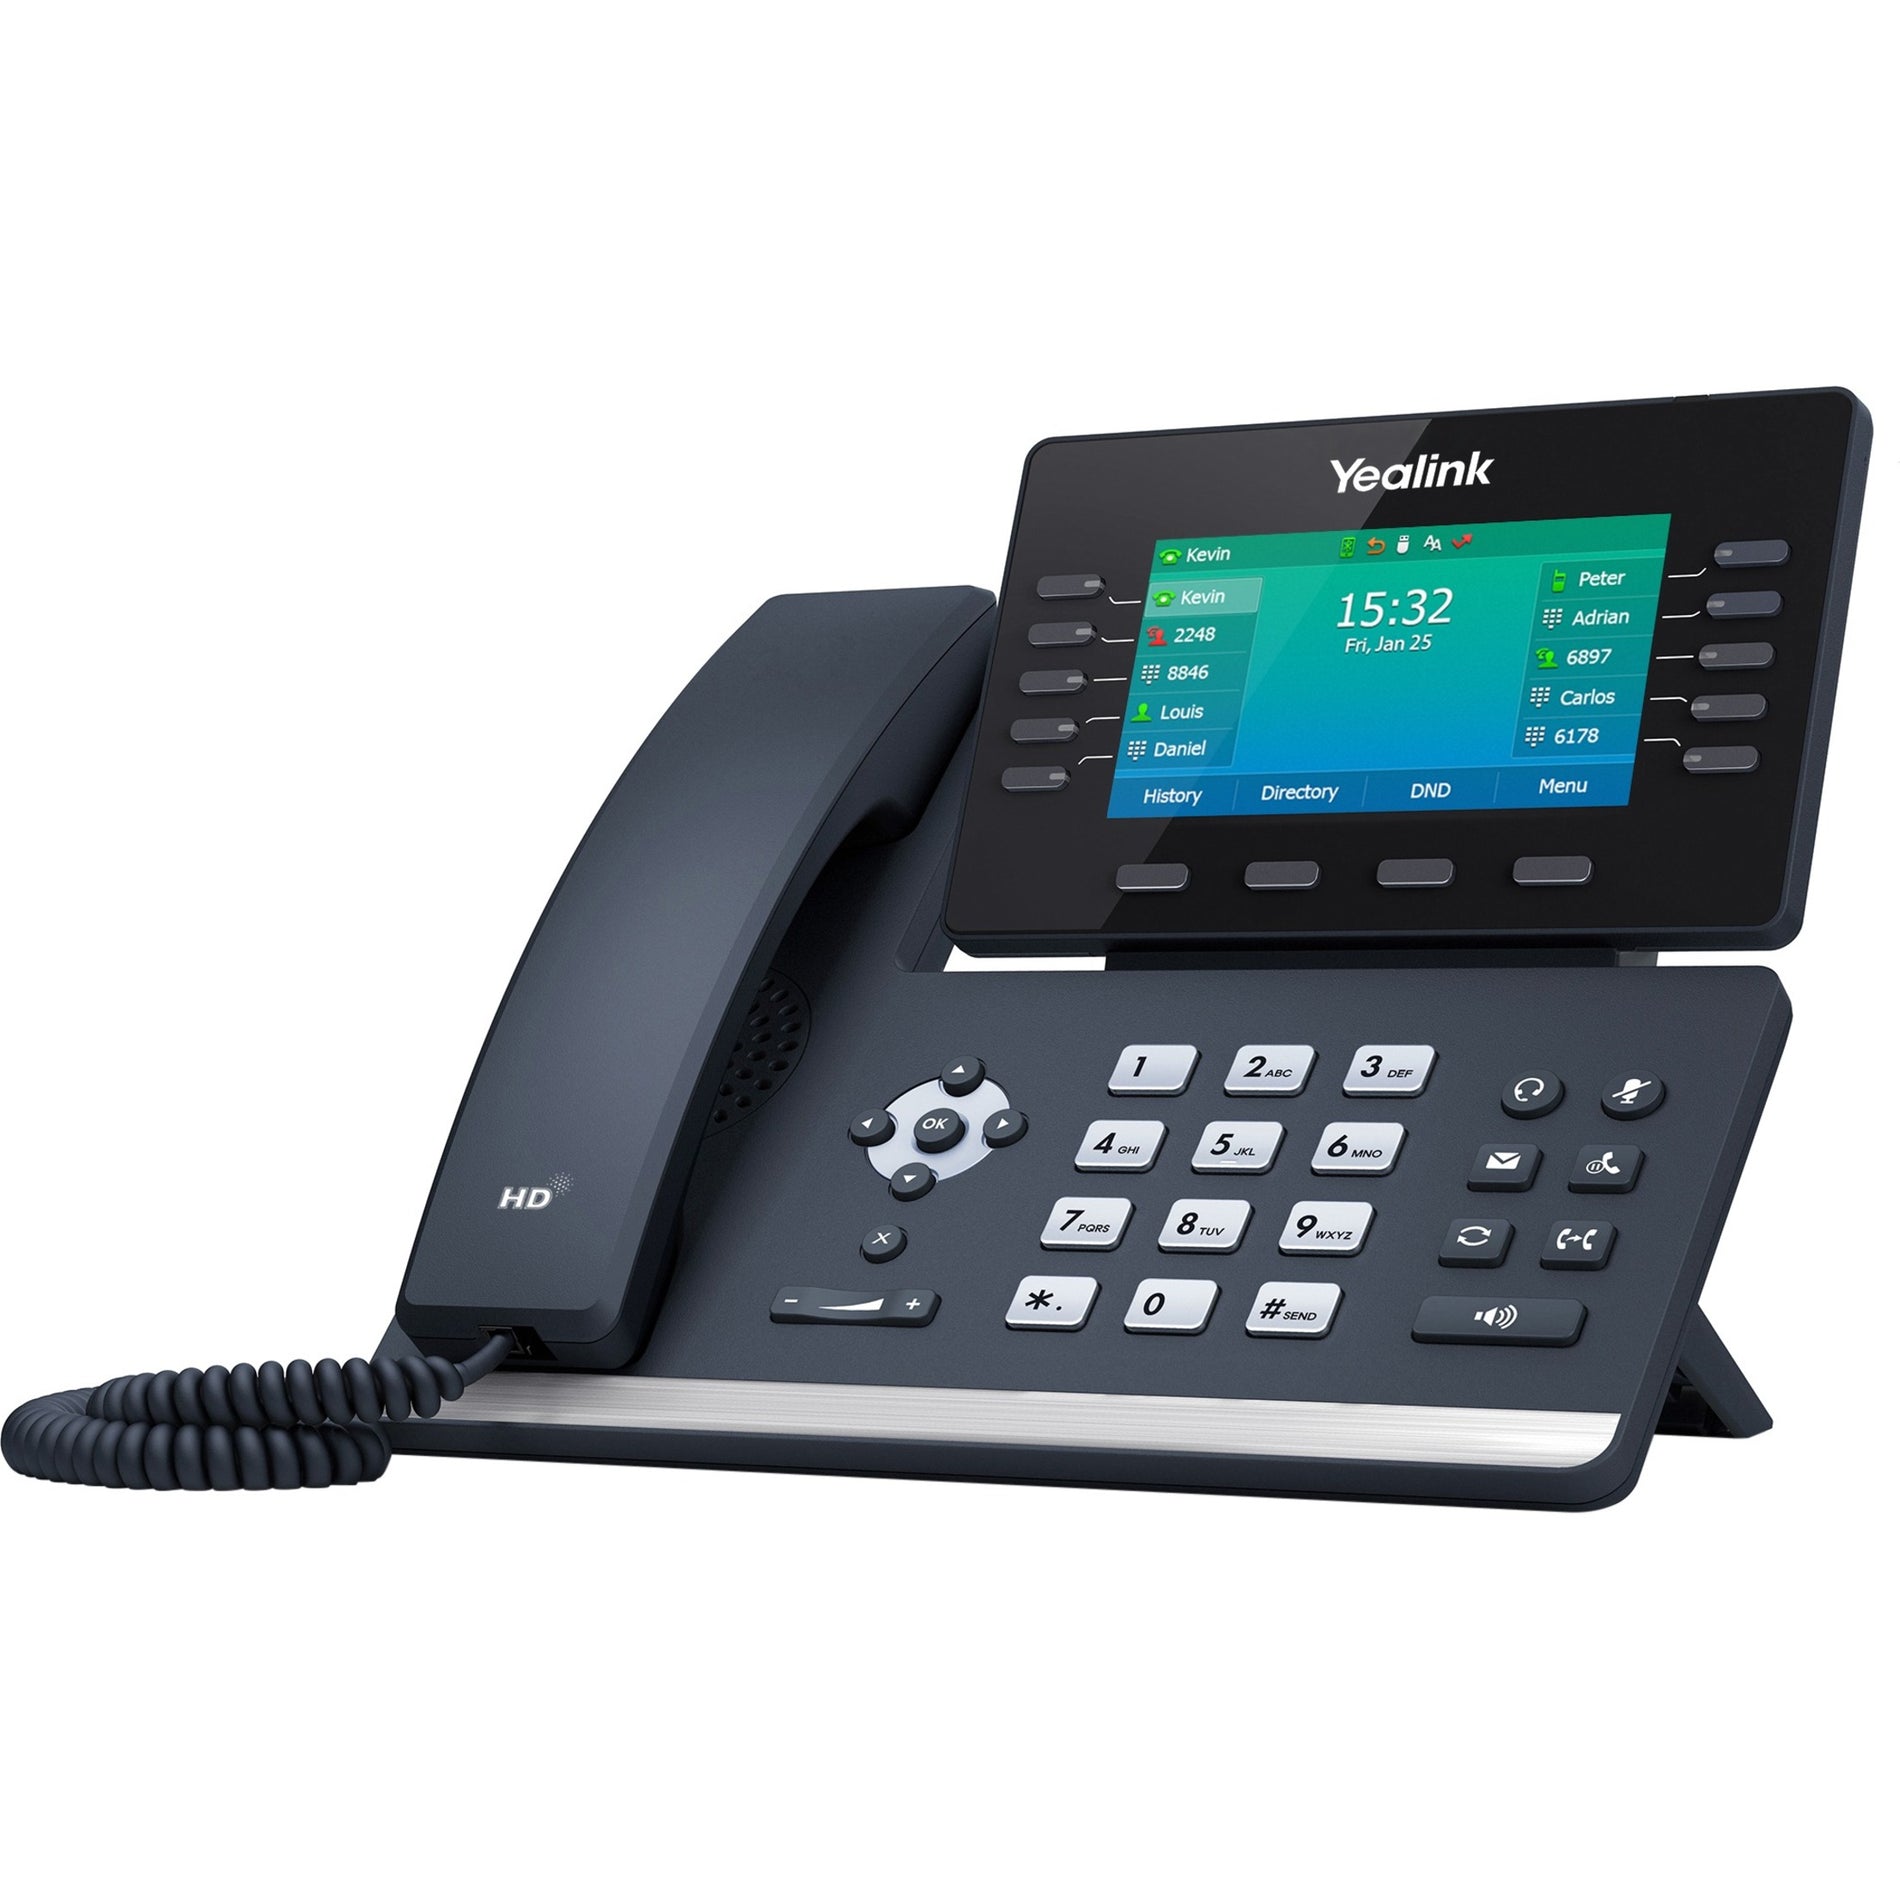 Yealink SIP-T54W Prime Business Phone with 4.4in. Color LCD Screen, Bluetooth 4.2